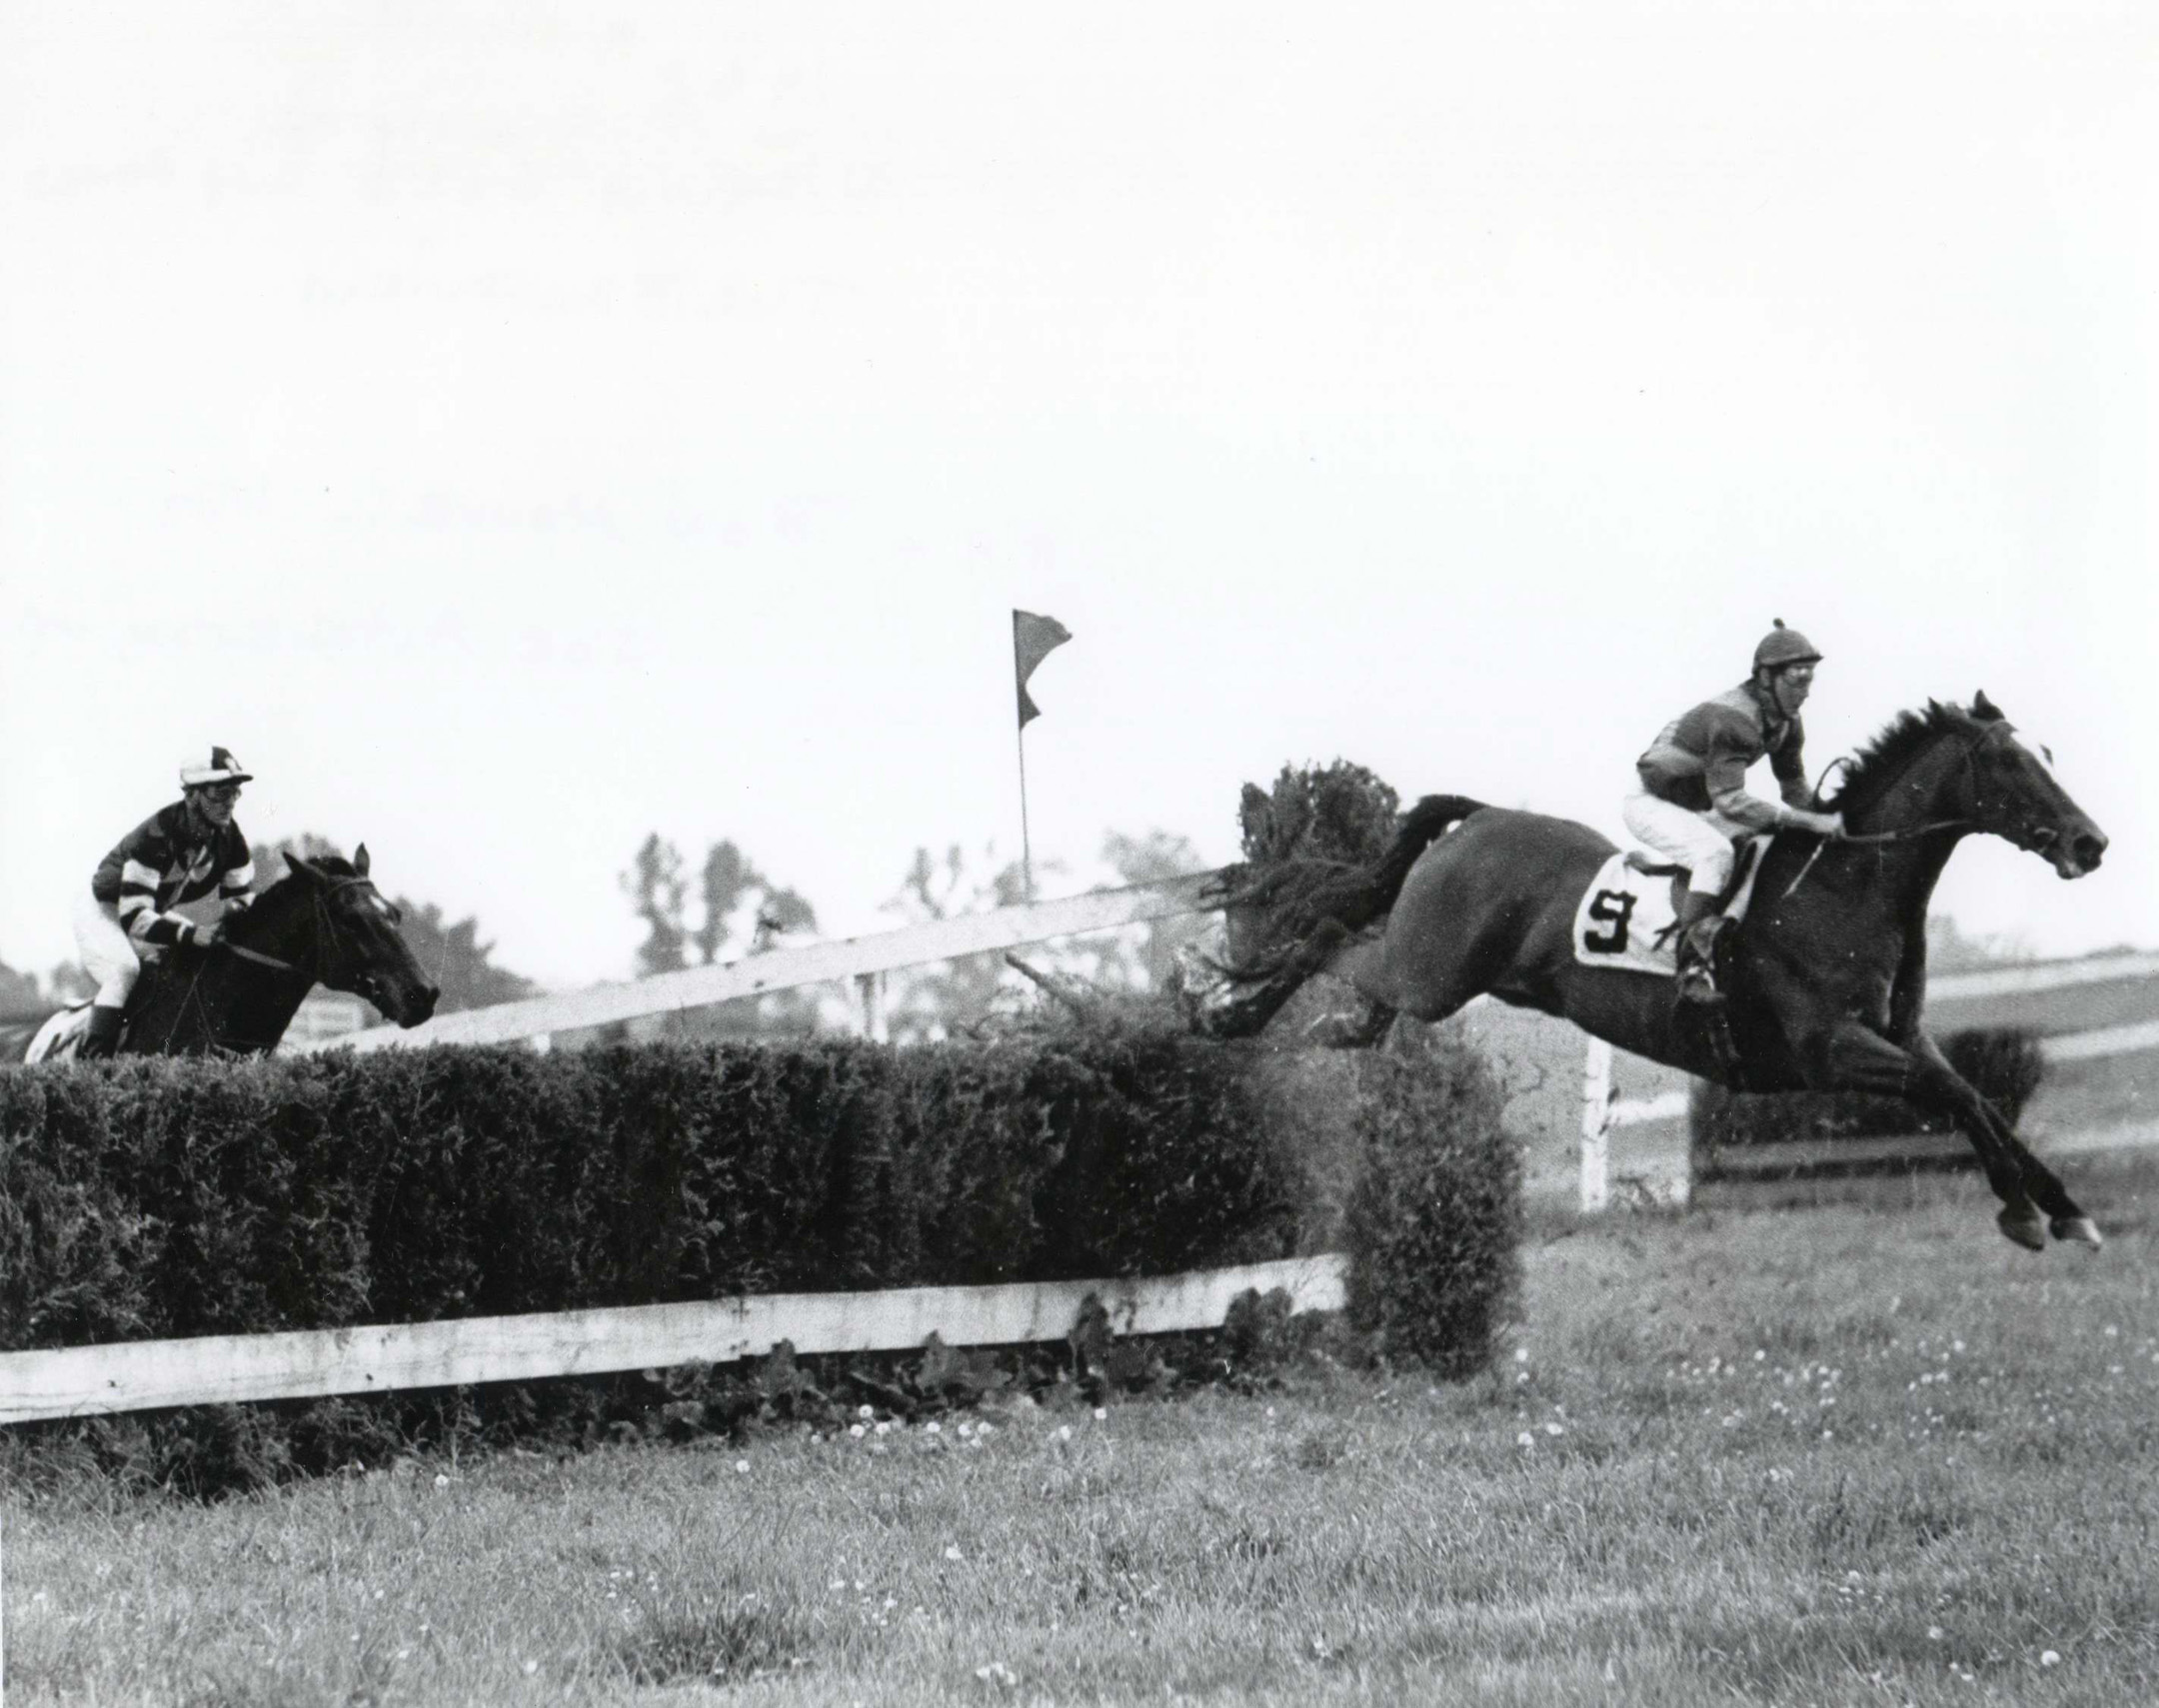 Bon Nouvel (Joe Aitcheson up) going over a jump at the Broadview on May 4, 1968 in Warrenton, Virginia (Douglas Lees/Museum Collection)